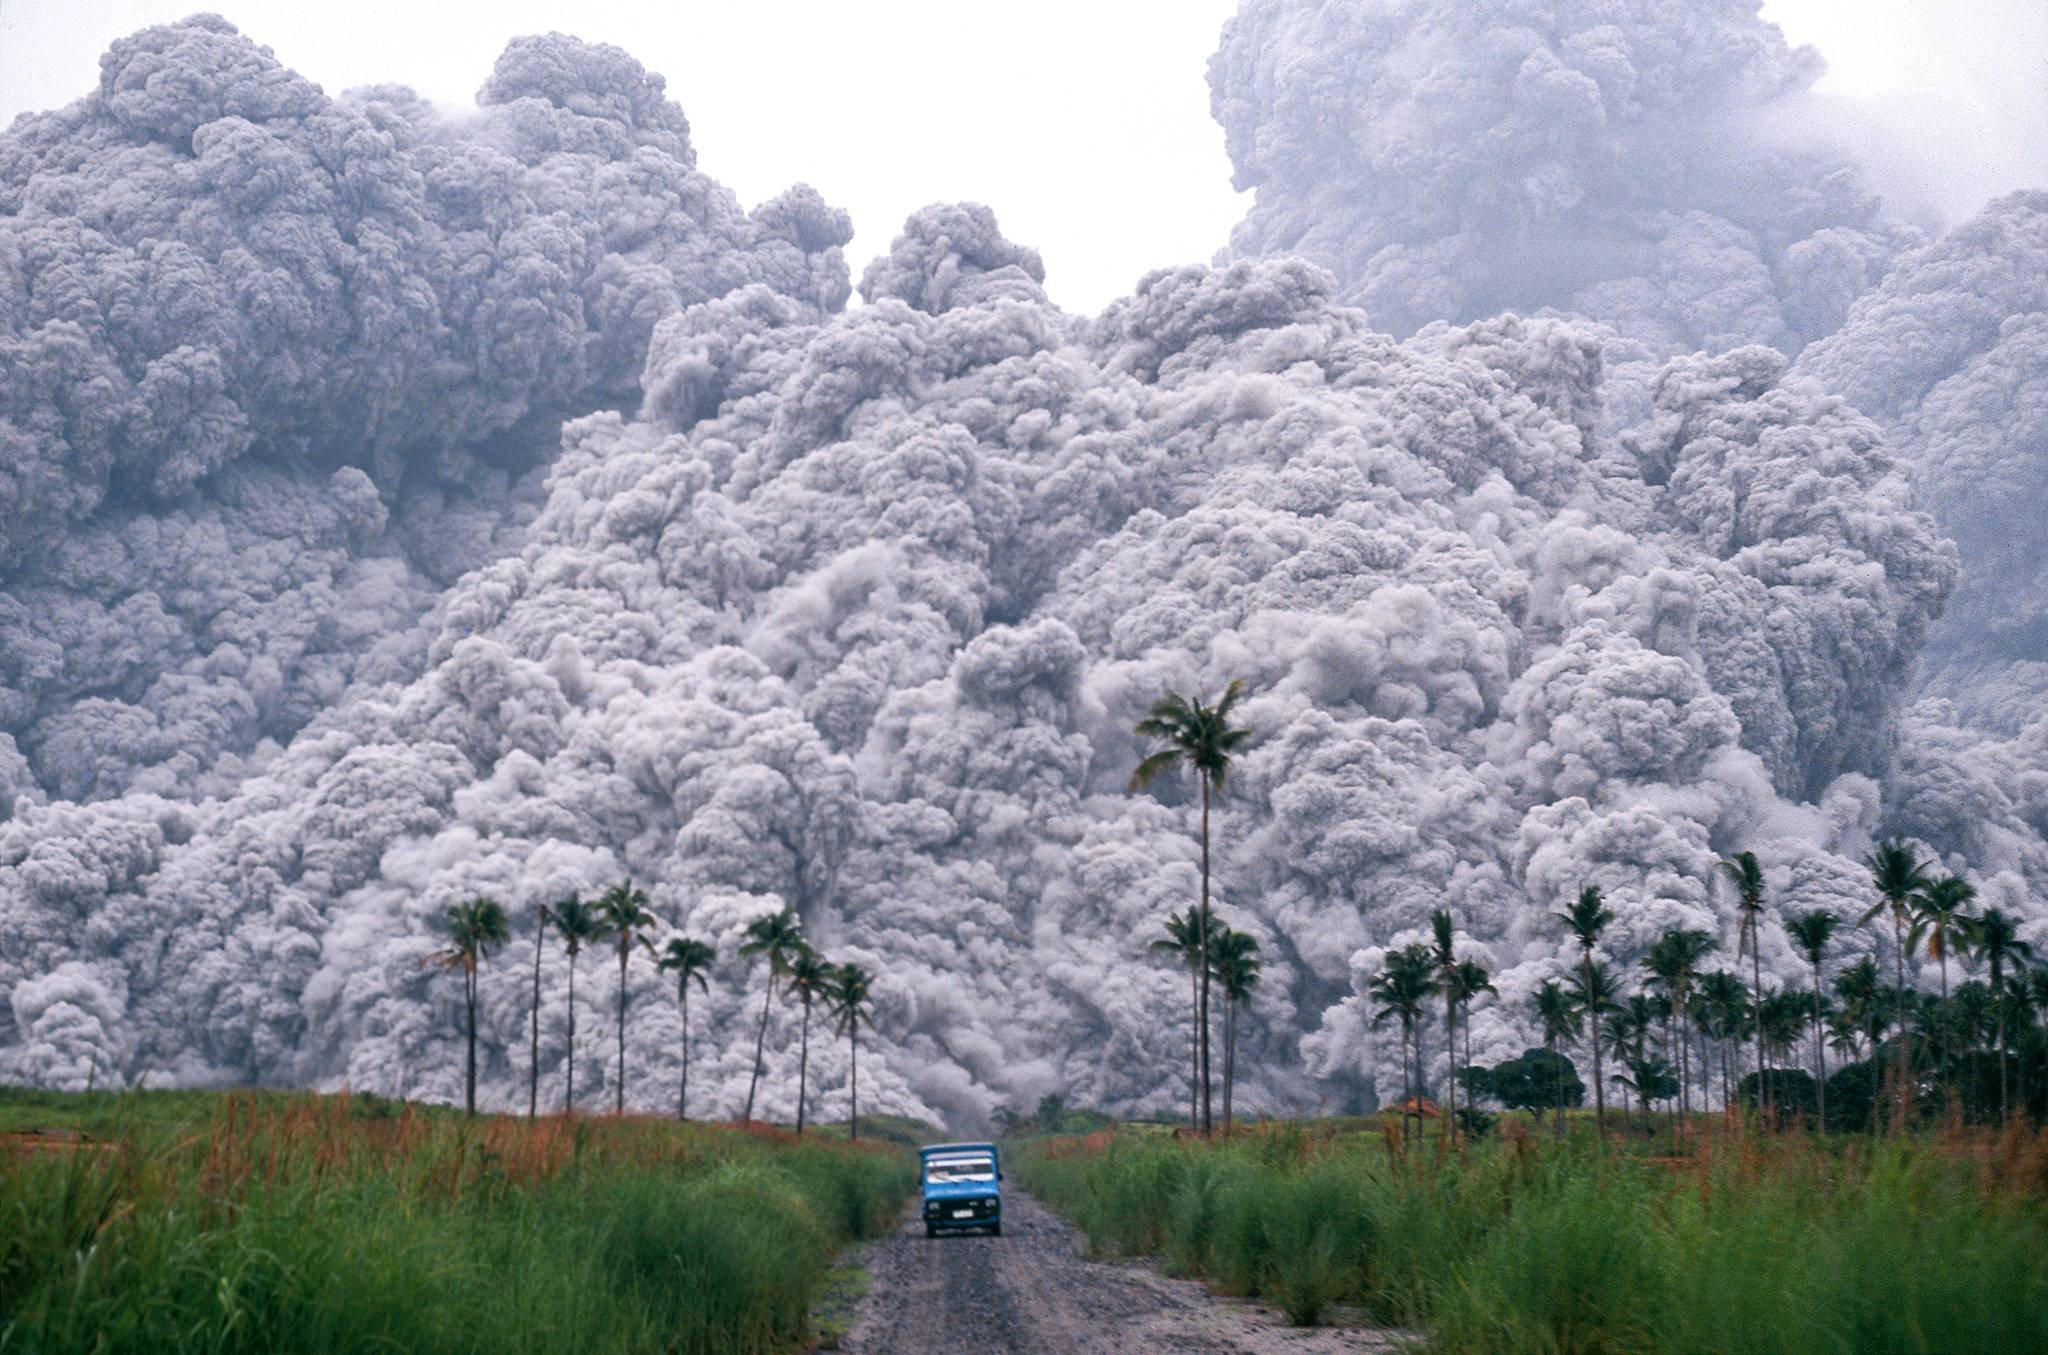 A pickup truck flees from the smoke and volcanic ash ( pyroclastic flows) spewing from the Mt. Pinatubo volcano that erupted during 1991 in the Philippines.  Amazingly the photographer Alberto Garcia survived this gut-wrenching scene and has won many awards for this amazing photograph. 